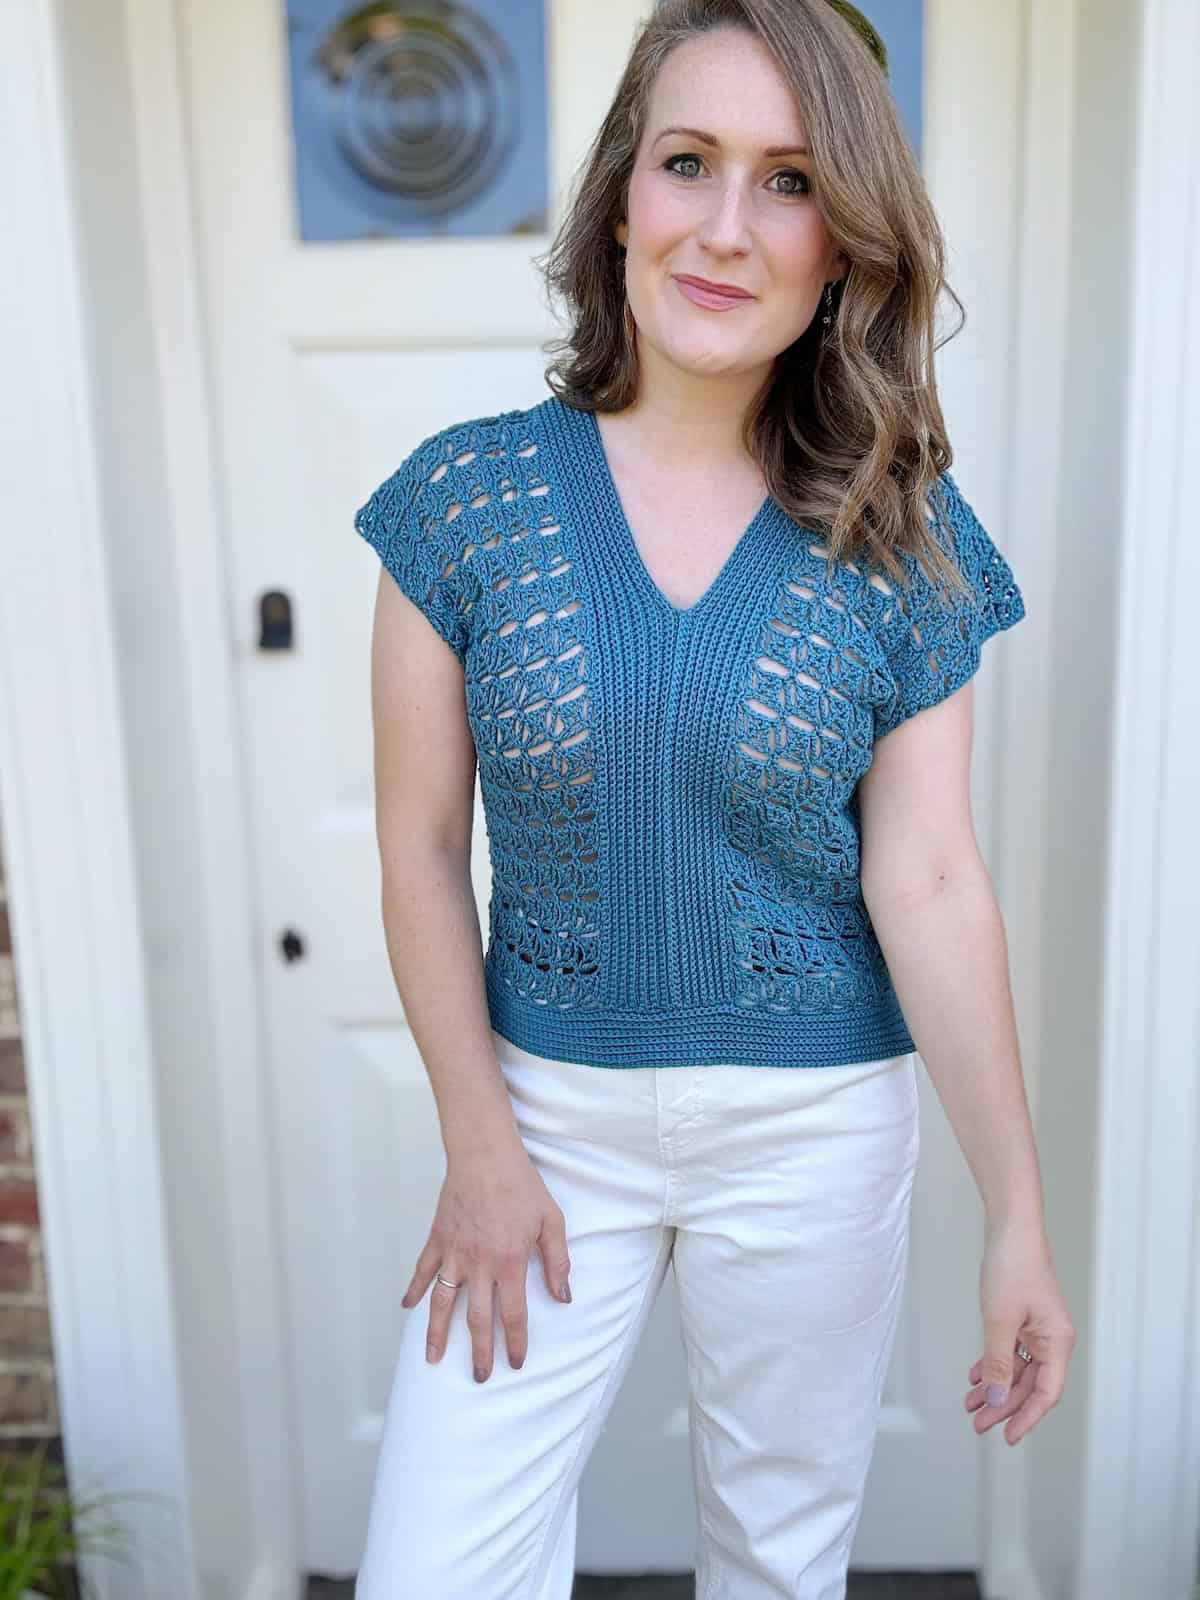 A person wearing a blue crocheted top and white pants stands in front of a white door with a slight smile.